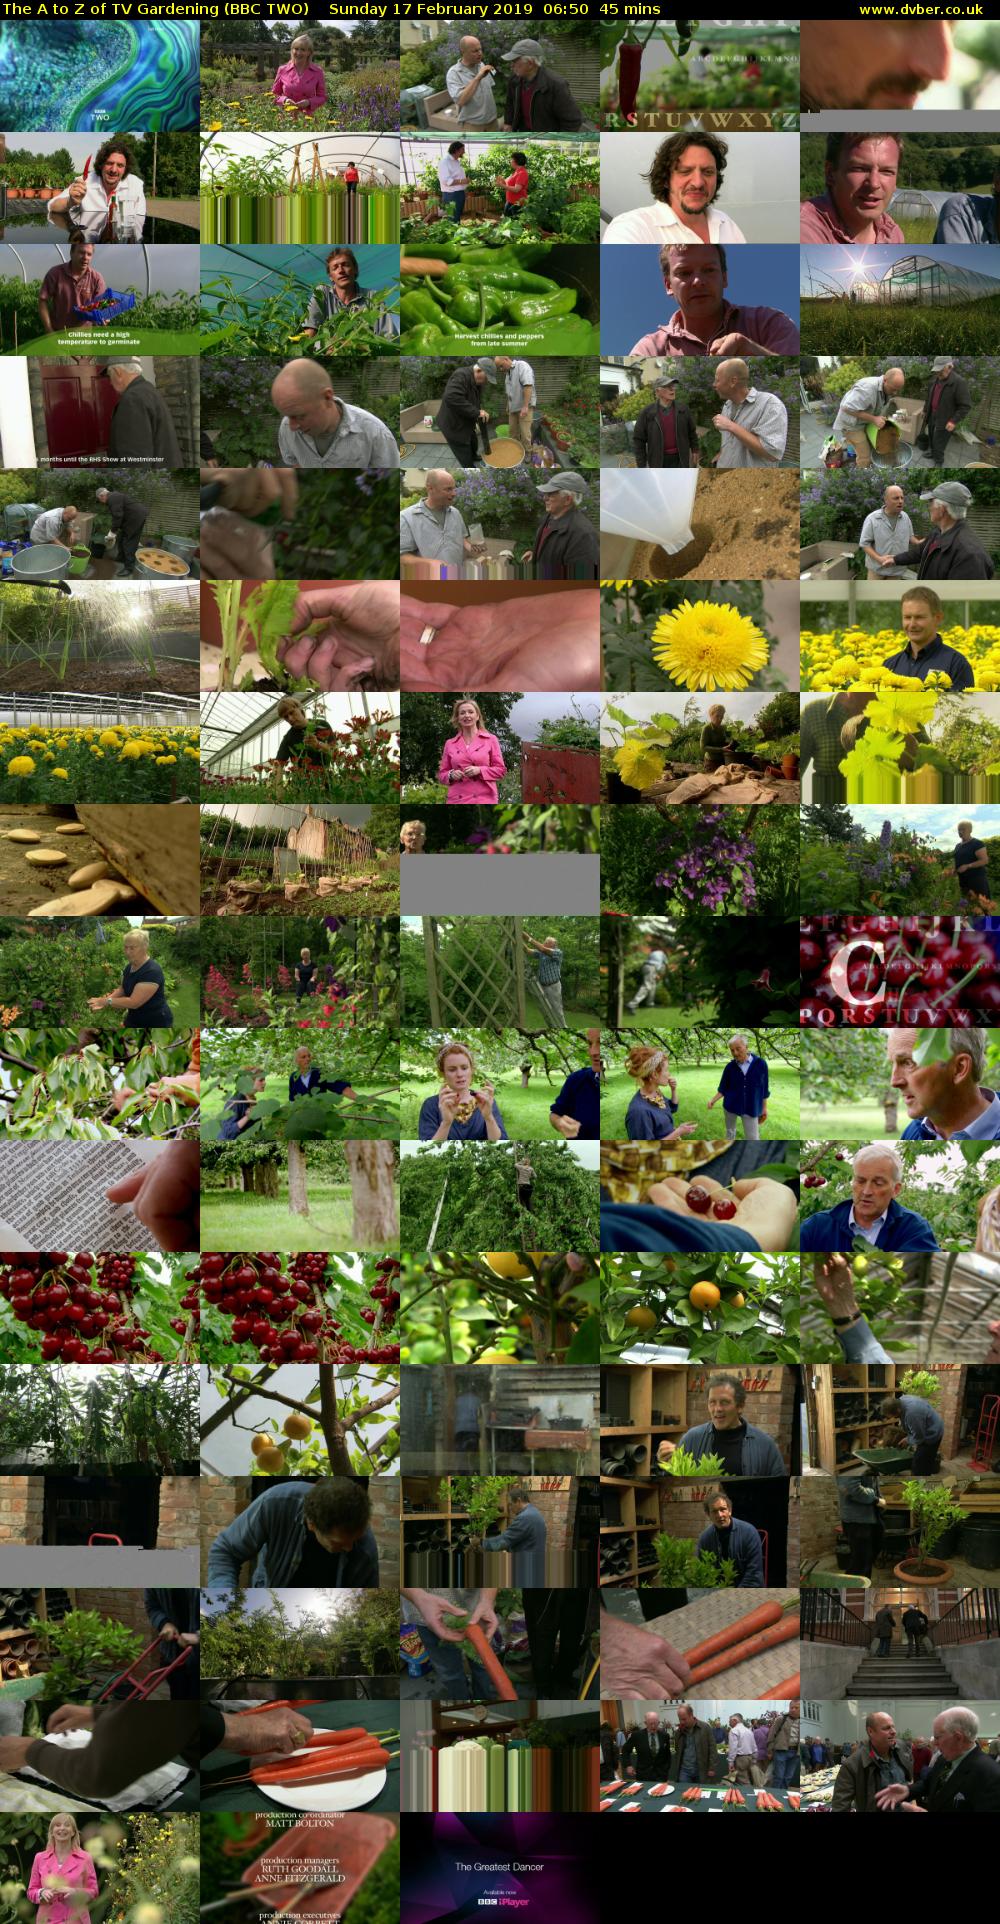 The A to Z of TV Gardening (BBC TWO) Sunday 17 February 2019 06:50 - 07:35